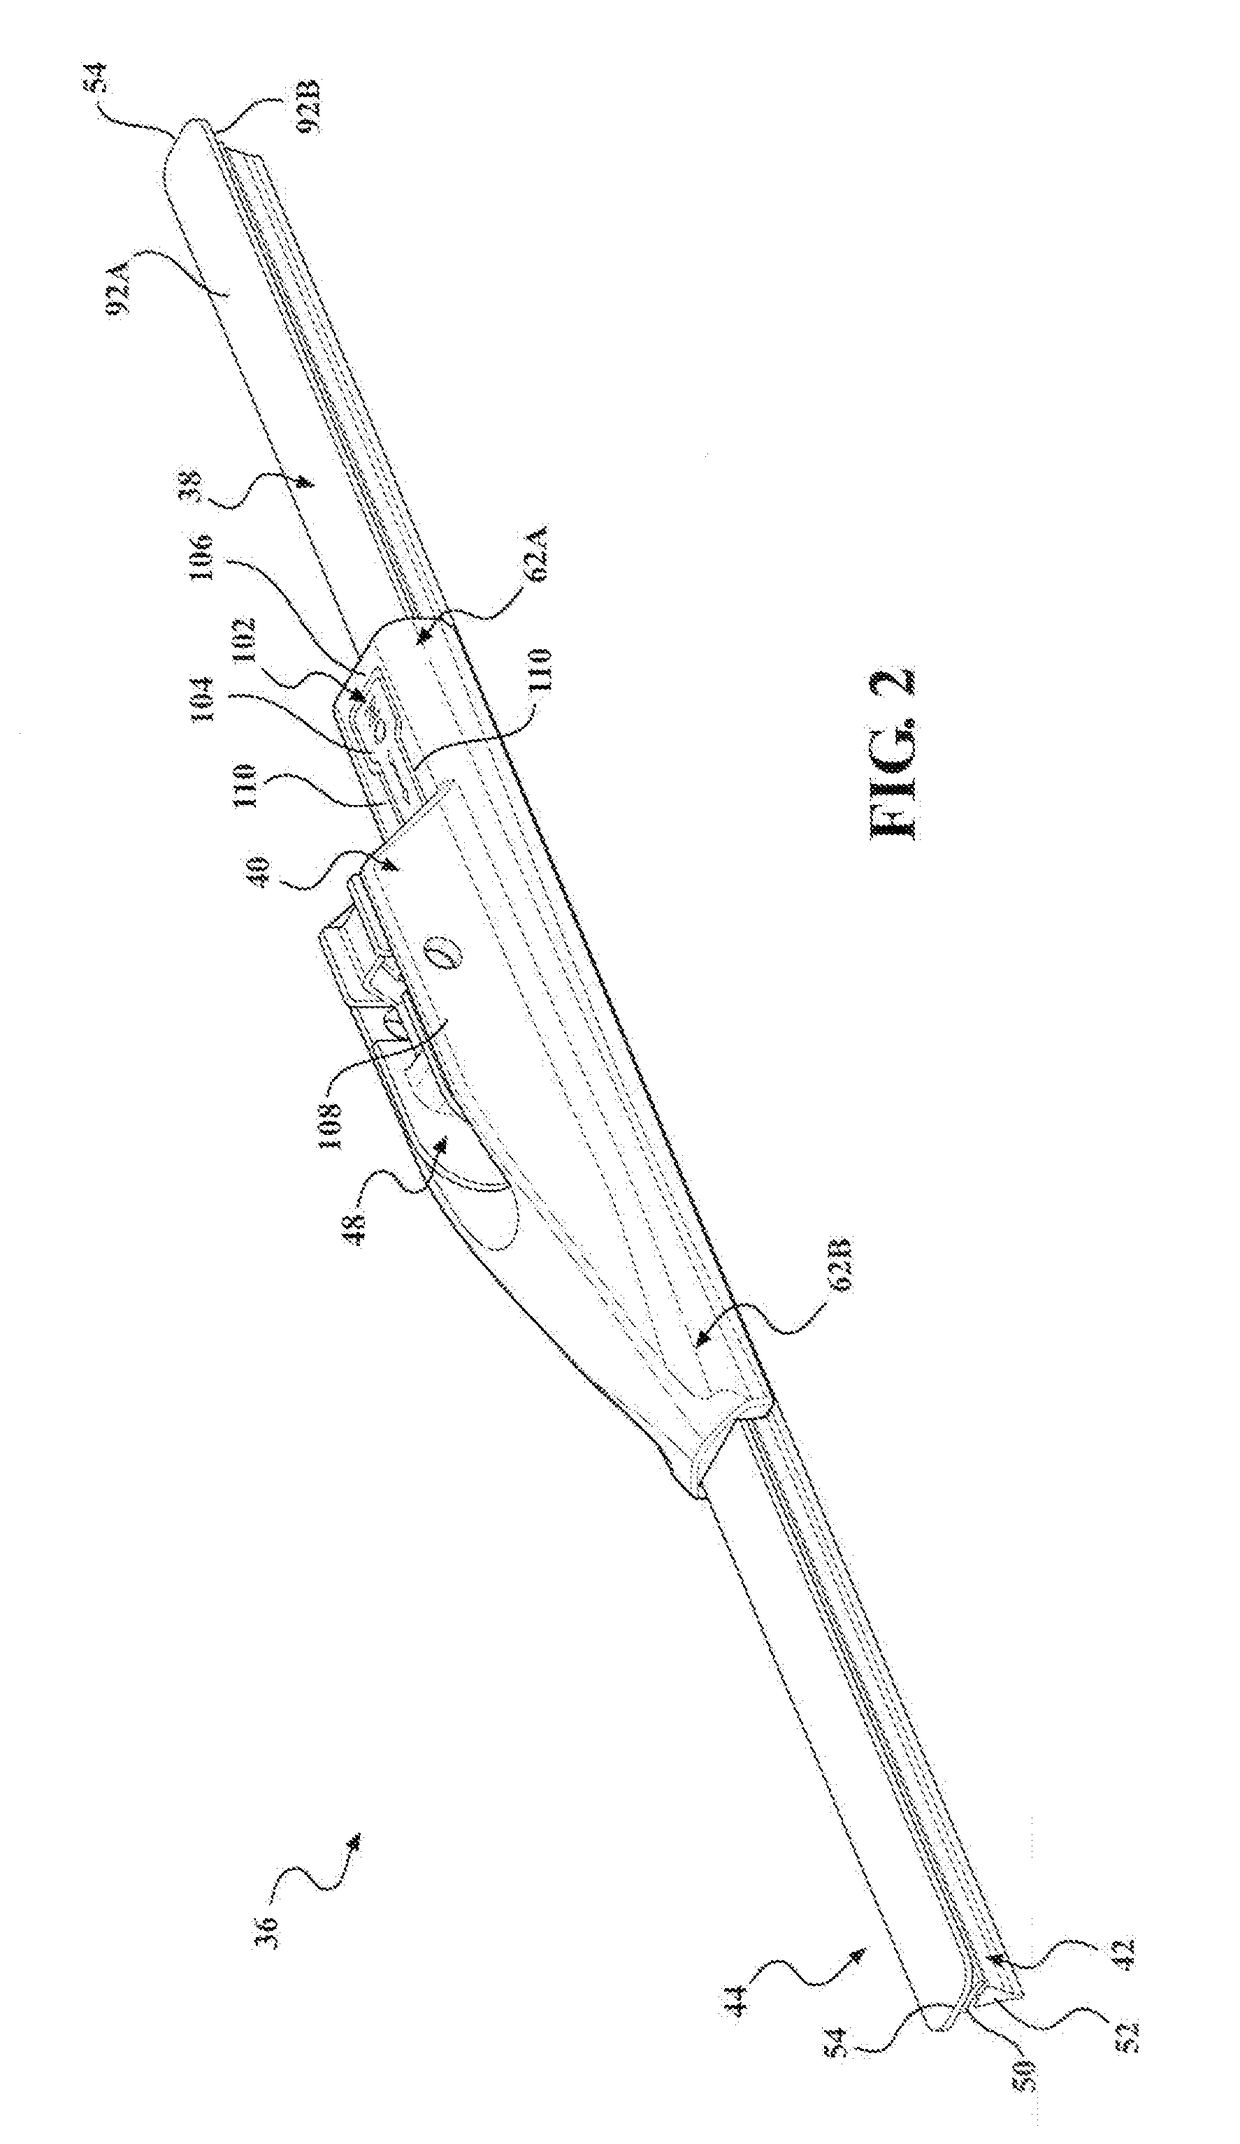 Refillable Wiper Blade With Refill Subassembly